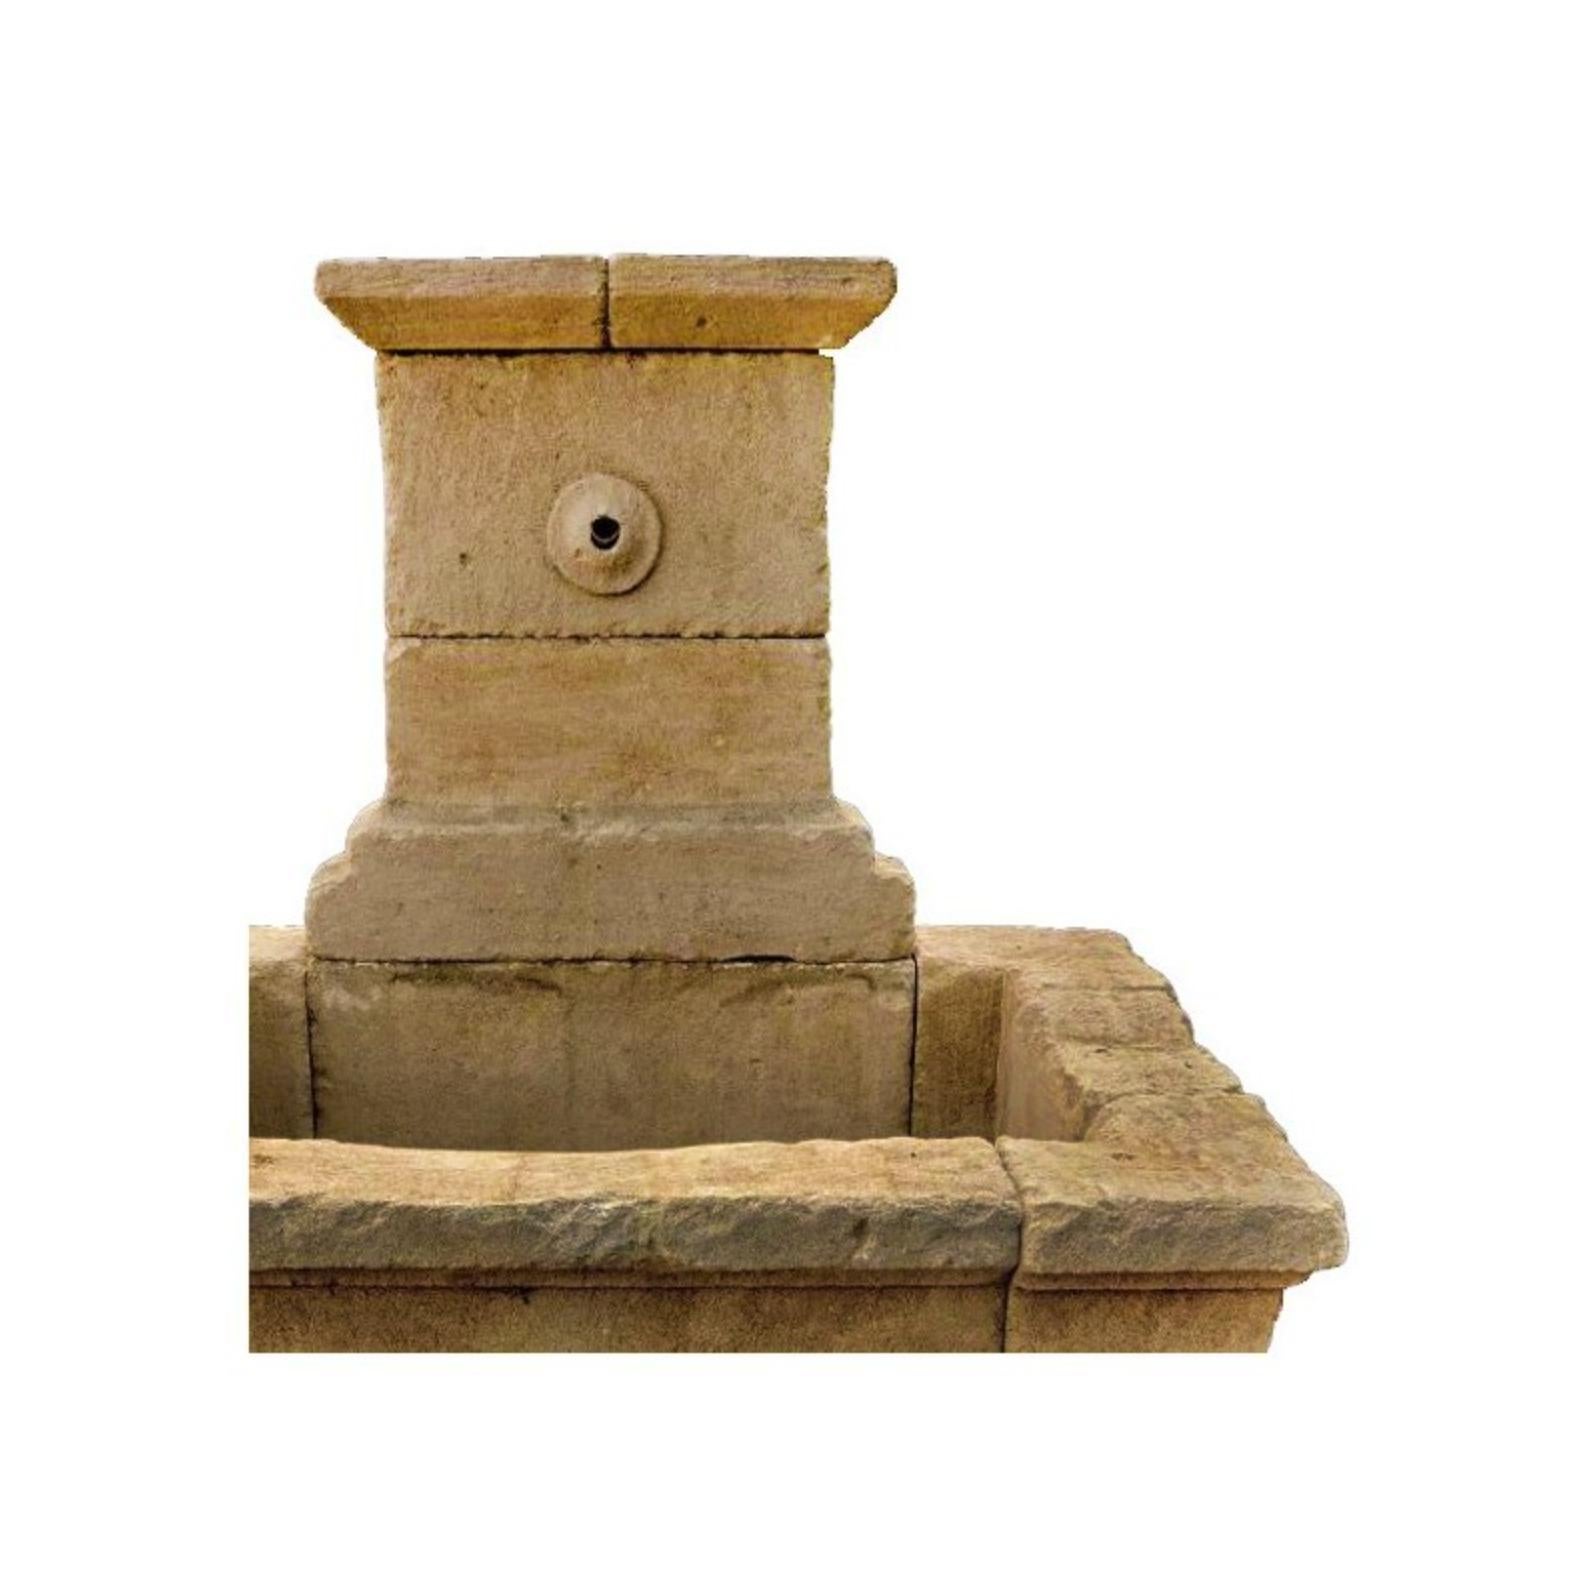 Ancient large stone fountain with Italian washbasin
19th century
Measures: Height 180 cm
Width 150 cm
Depth 55 cm
Thickness 15 cm
Weight 1800 Kg
Material Limestone.